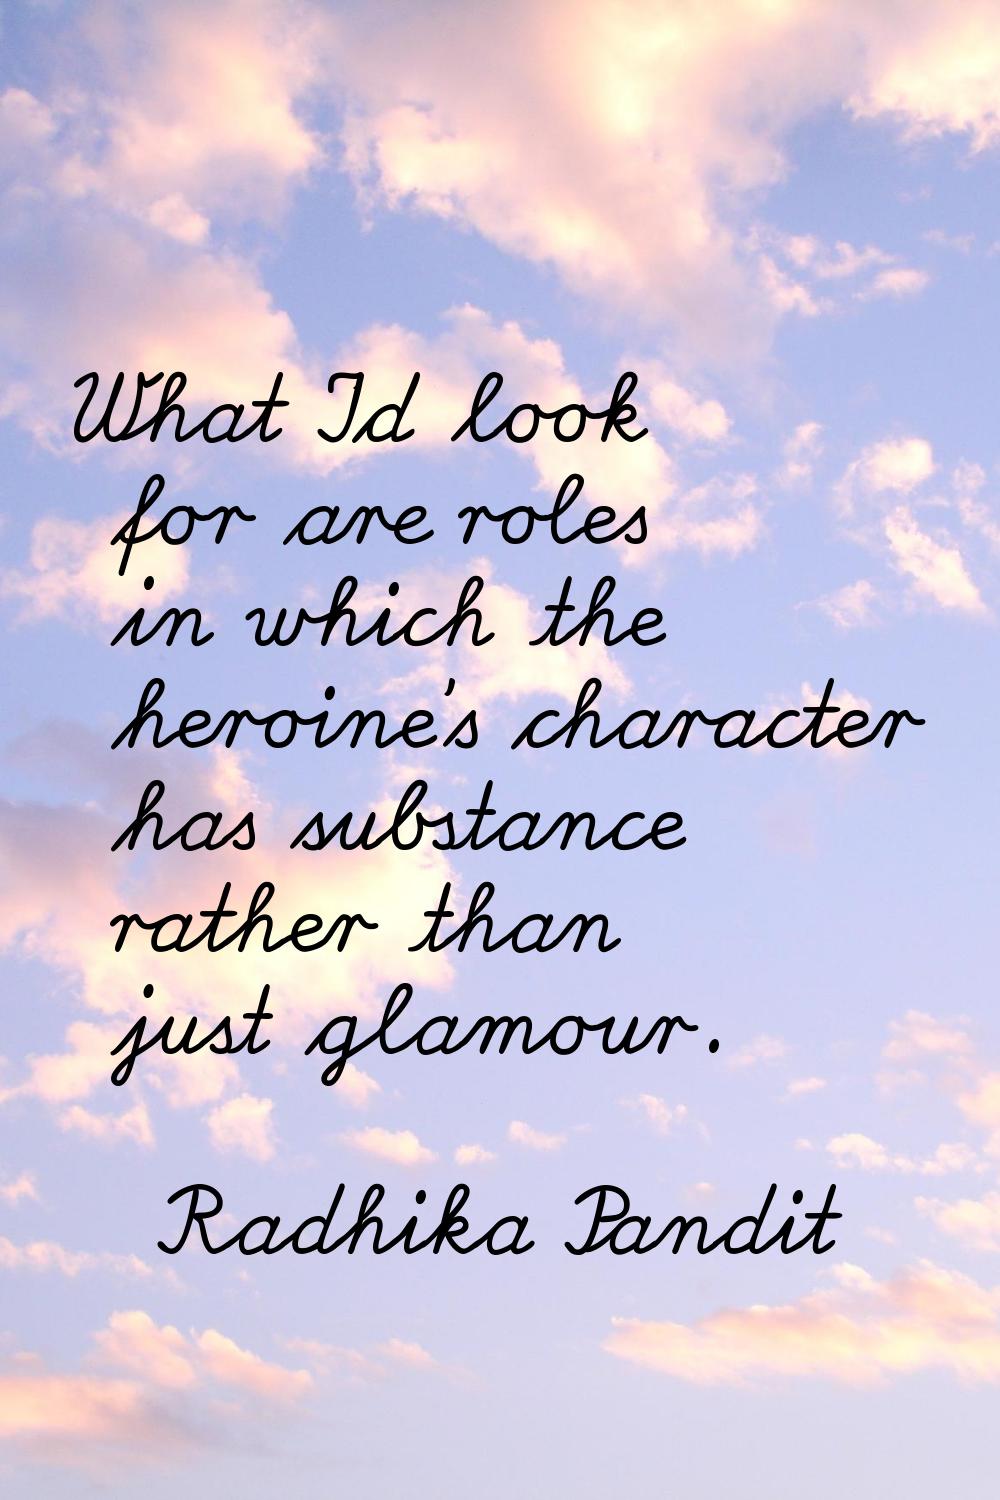 What I'd look for are roles in which the heroine's character has substance rather than just glamour